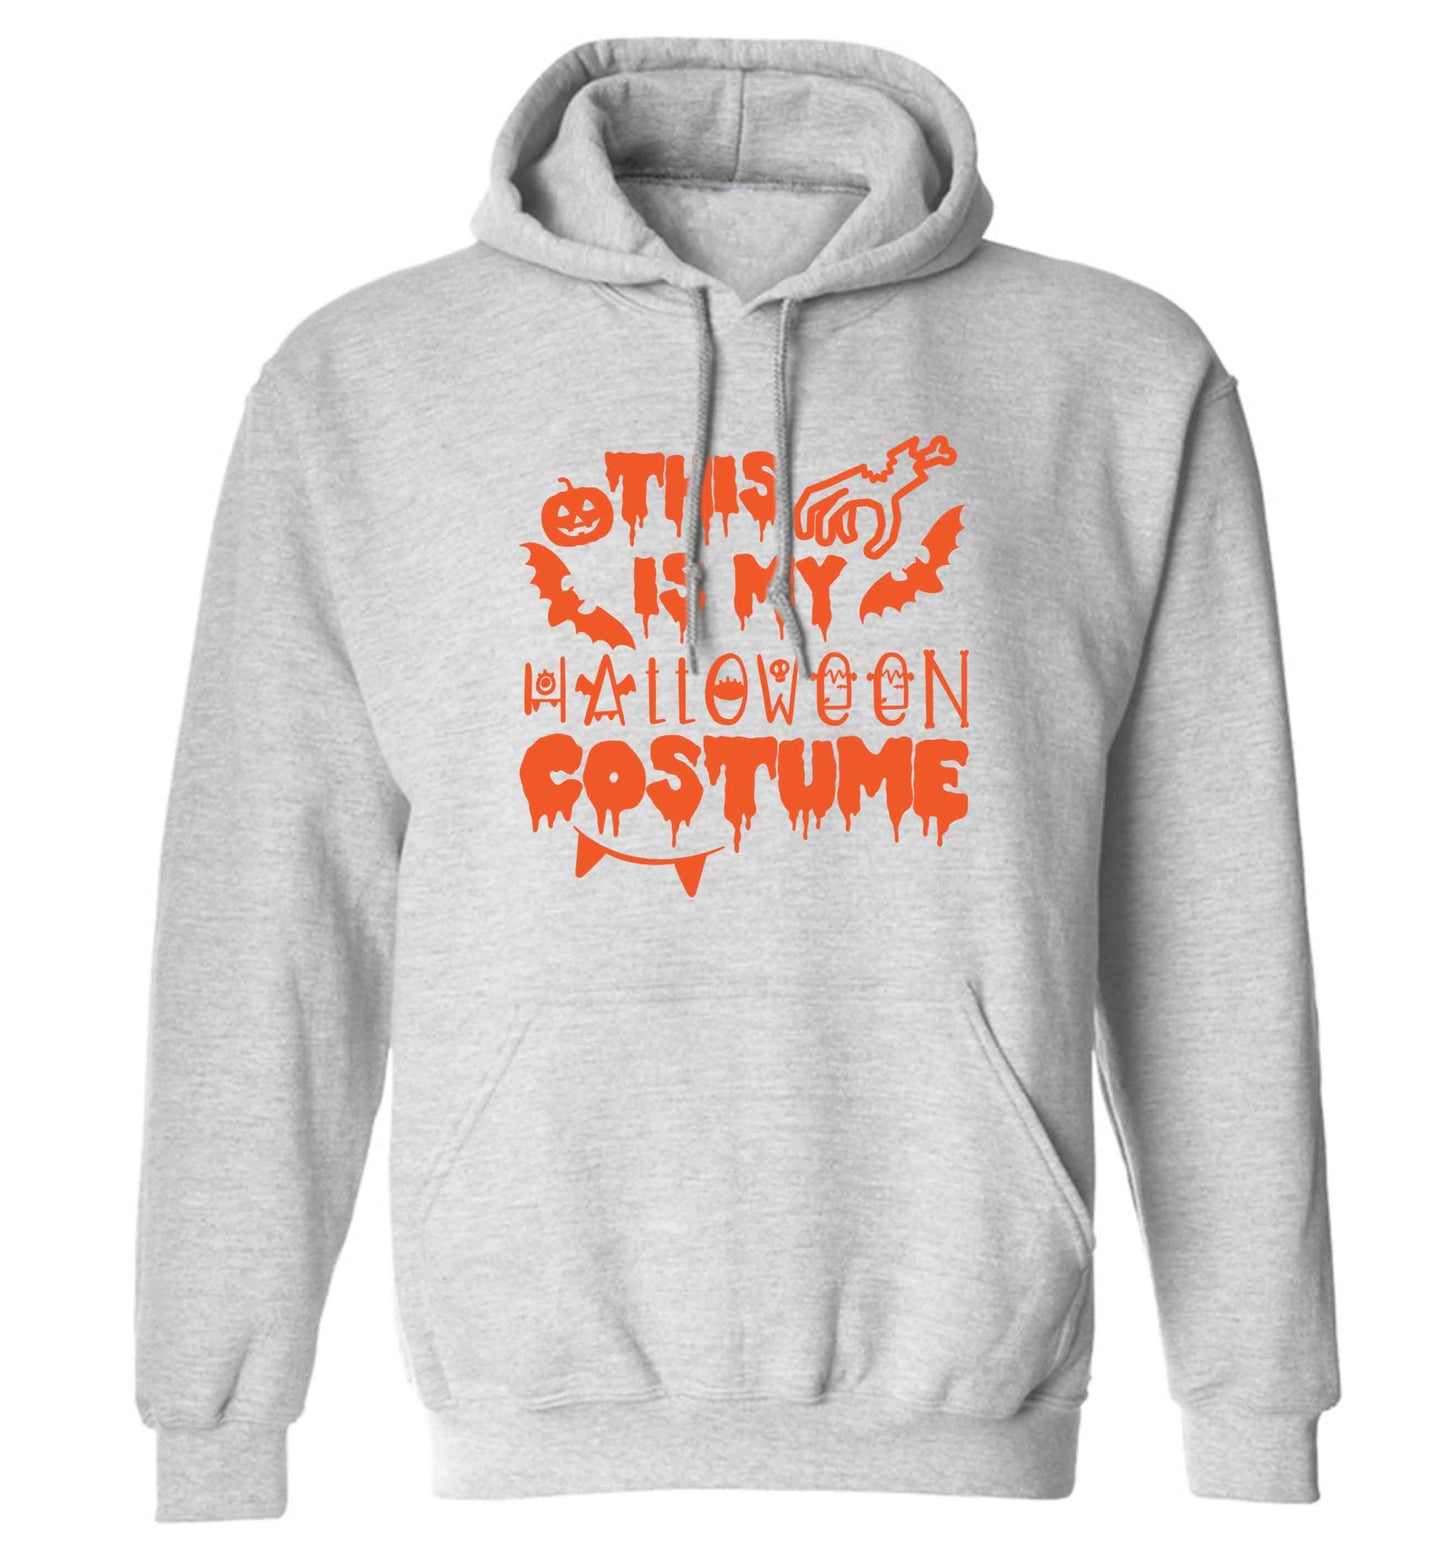 This is my halloween costume adults unisex grey hoodie 2XL